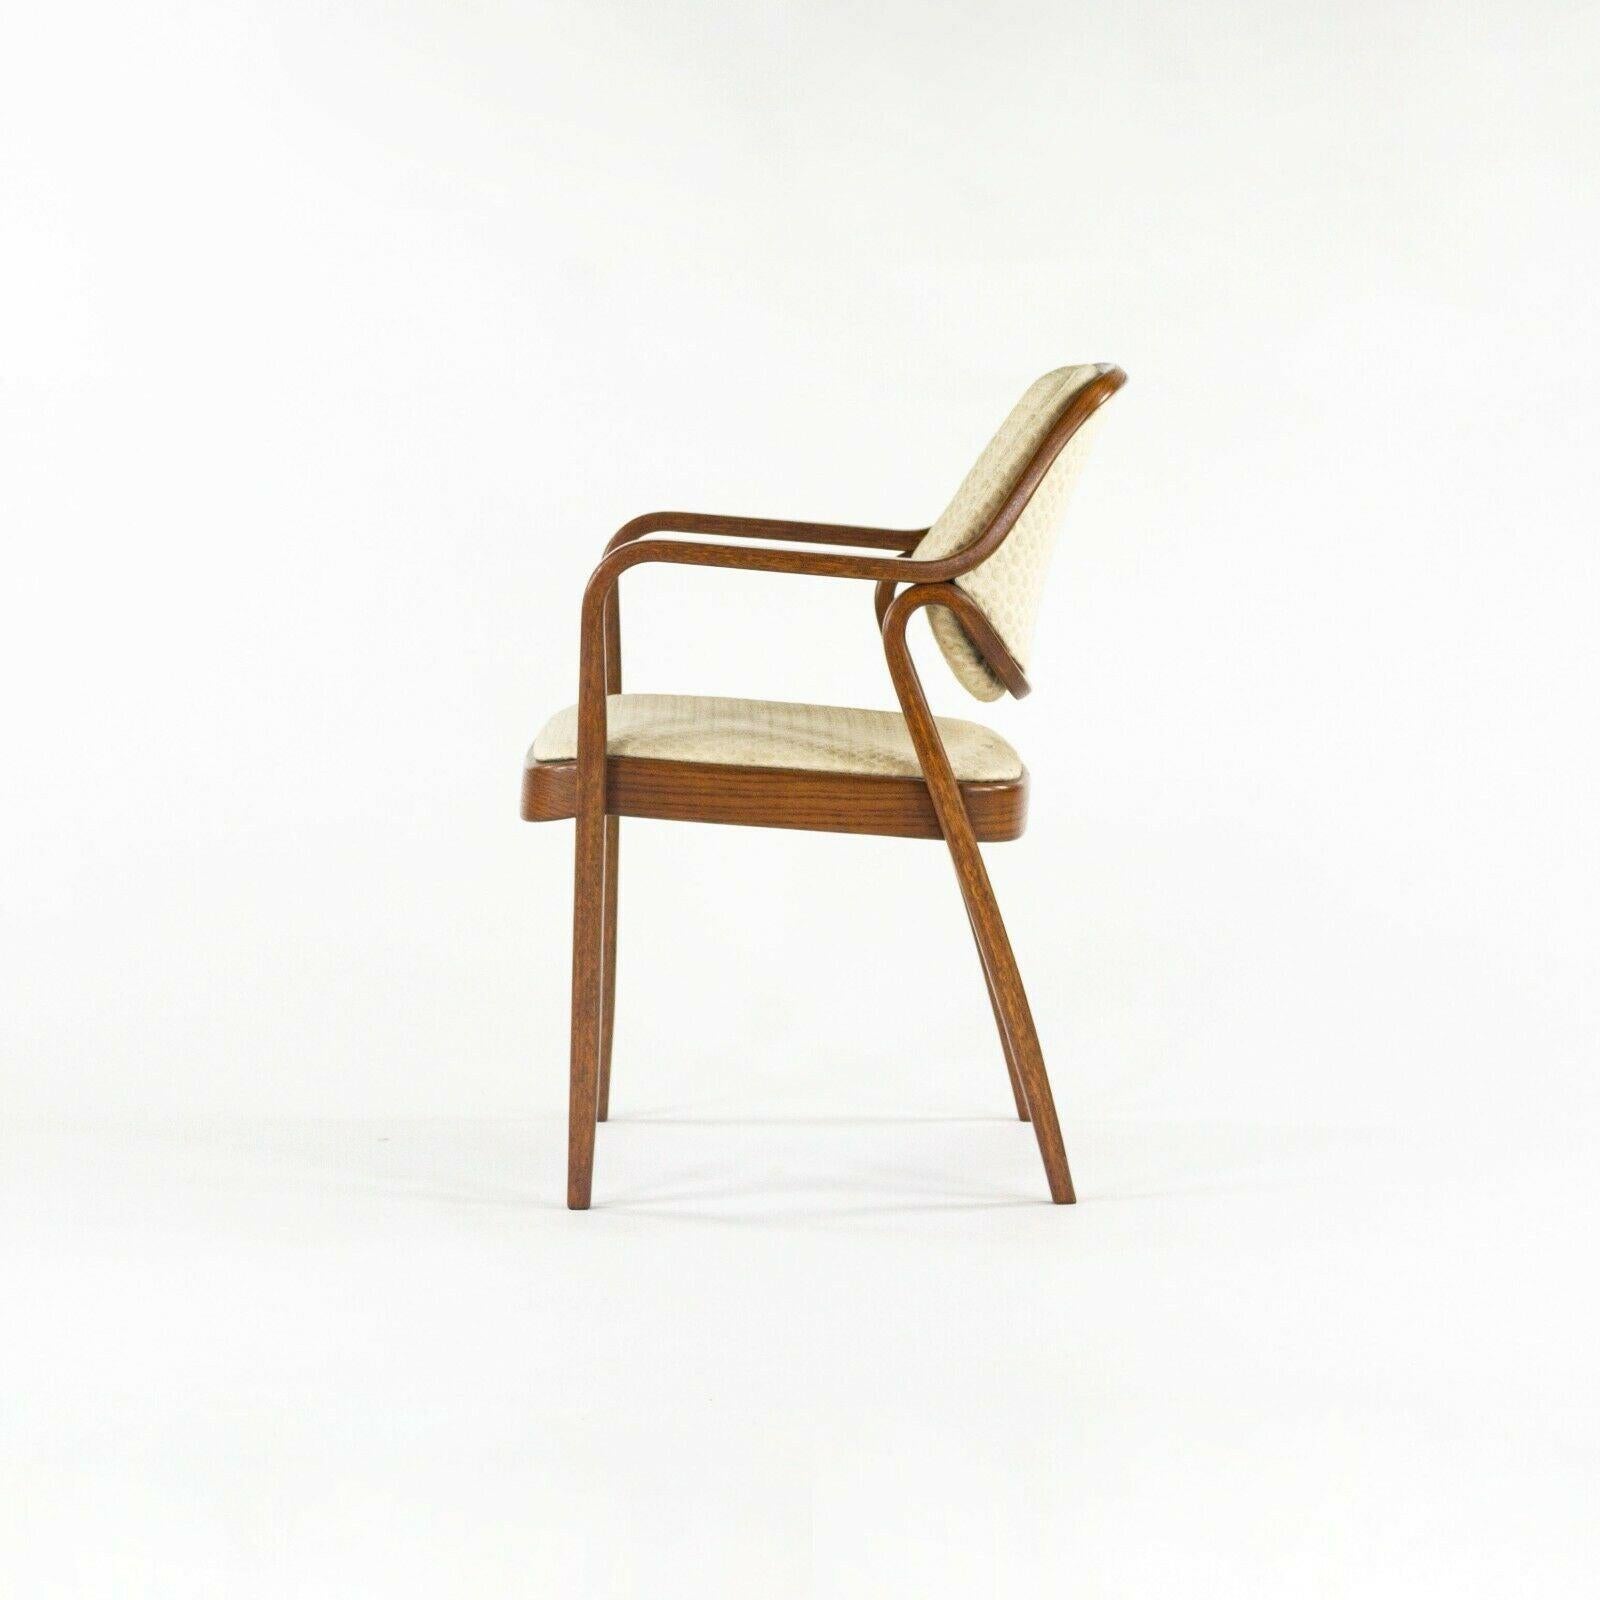 1980s Pair of Don Petitt for Knoll 1105 Bentwood Armchair in Oak with Tan Fabric For Sale 2